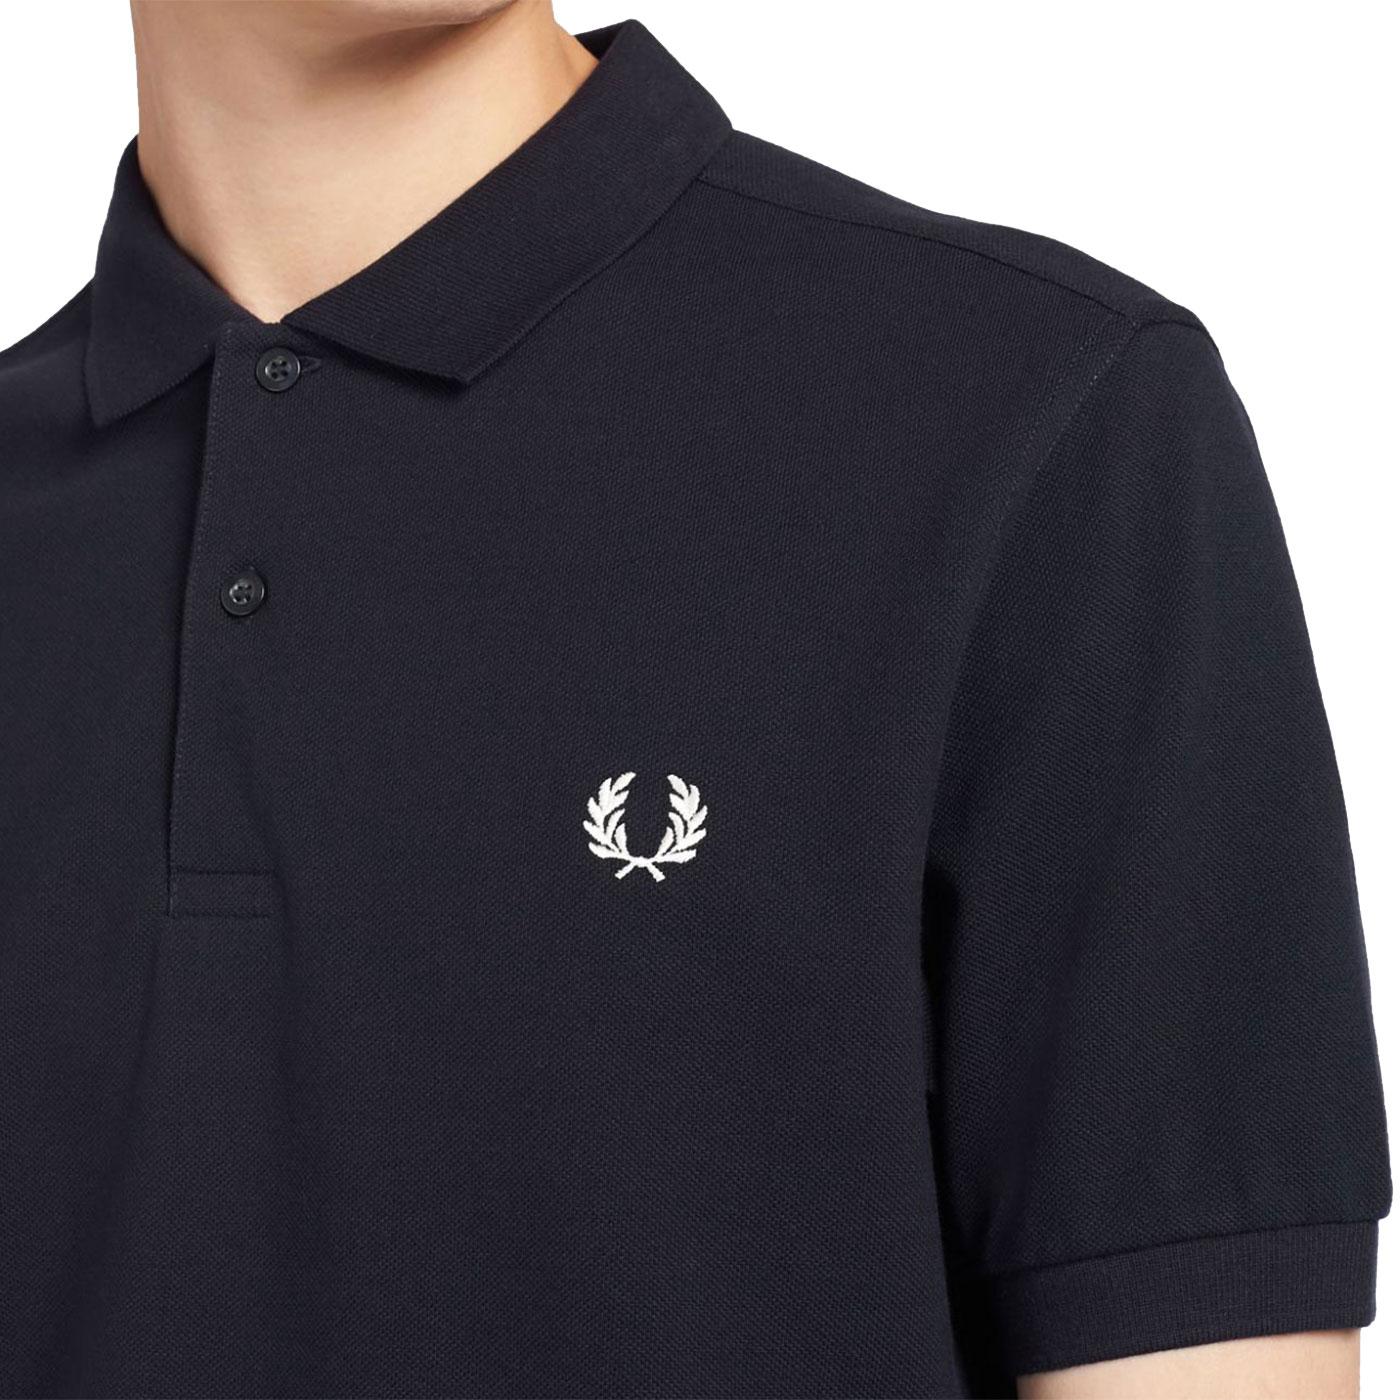 FRED PERRY Men's Retro Slim Fit Pique Polo Shirt in Navy